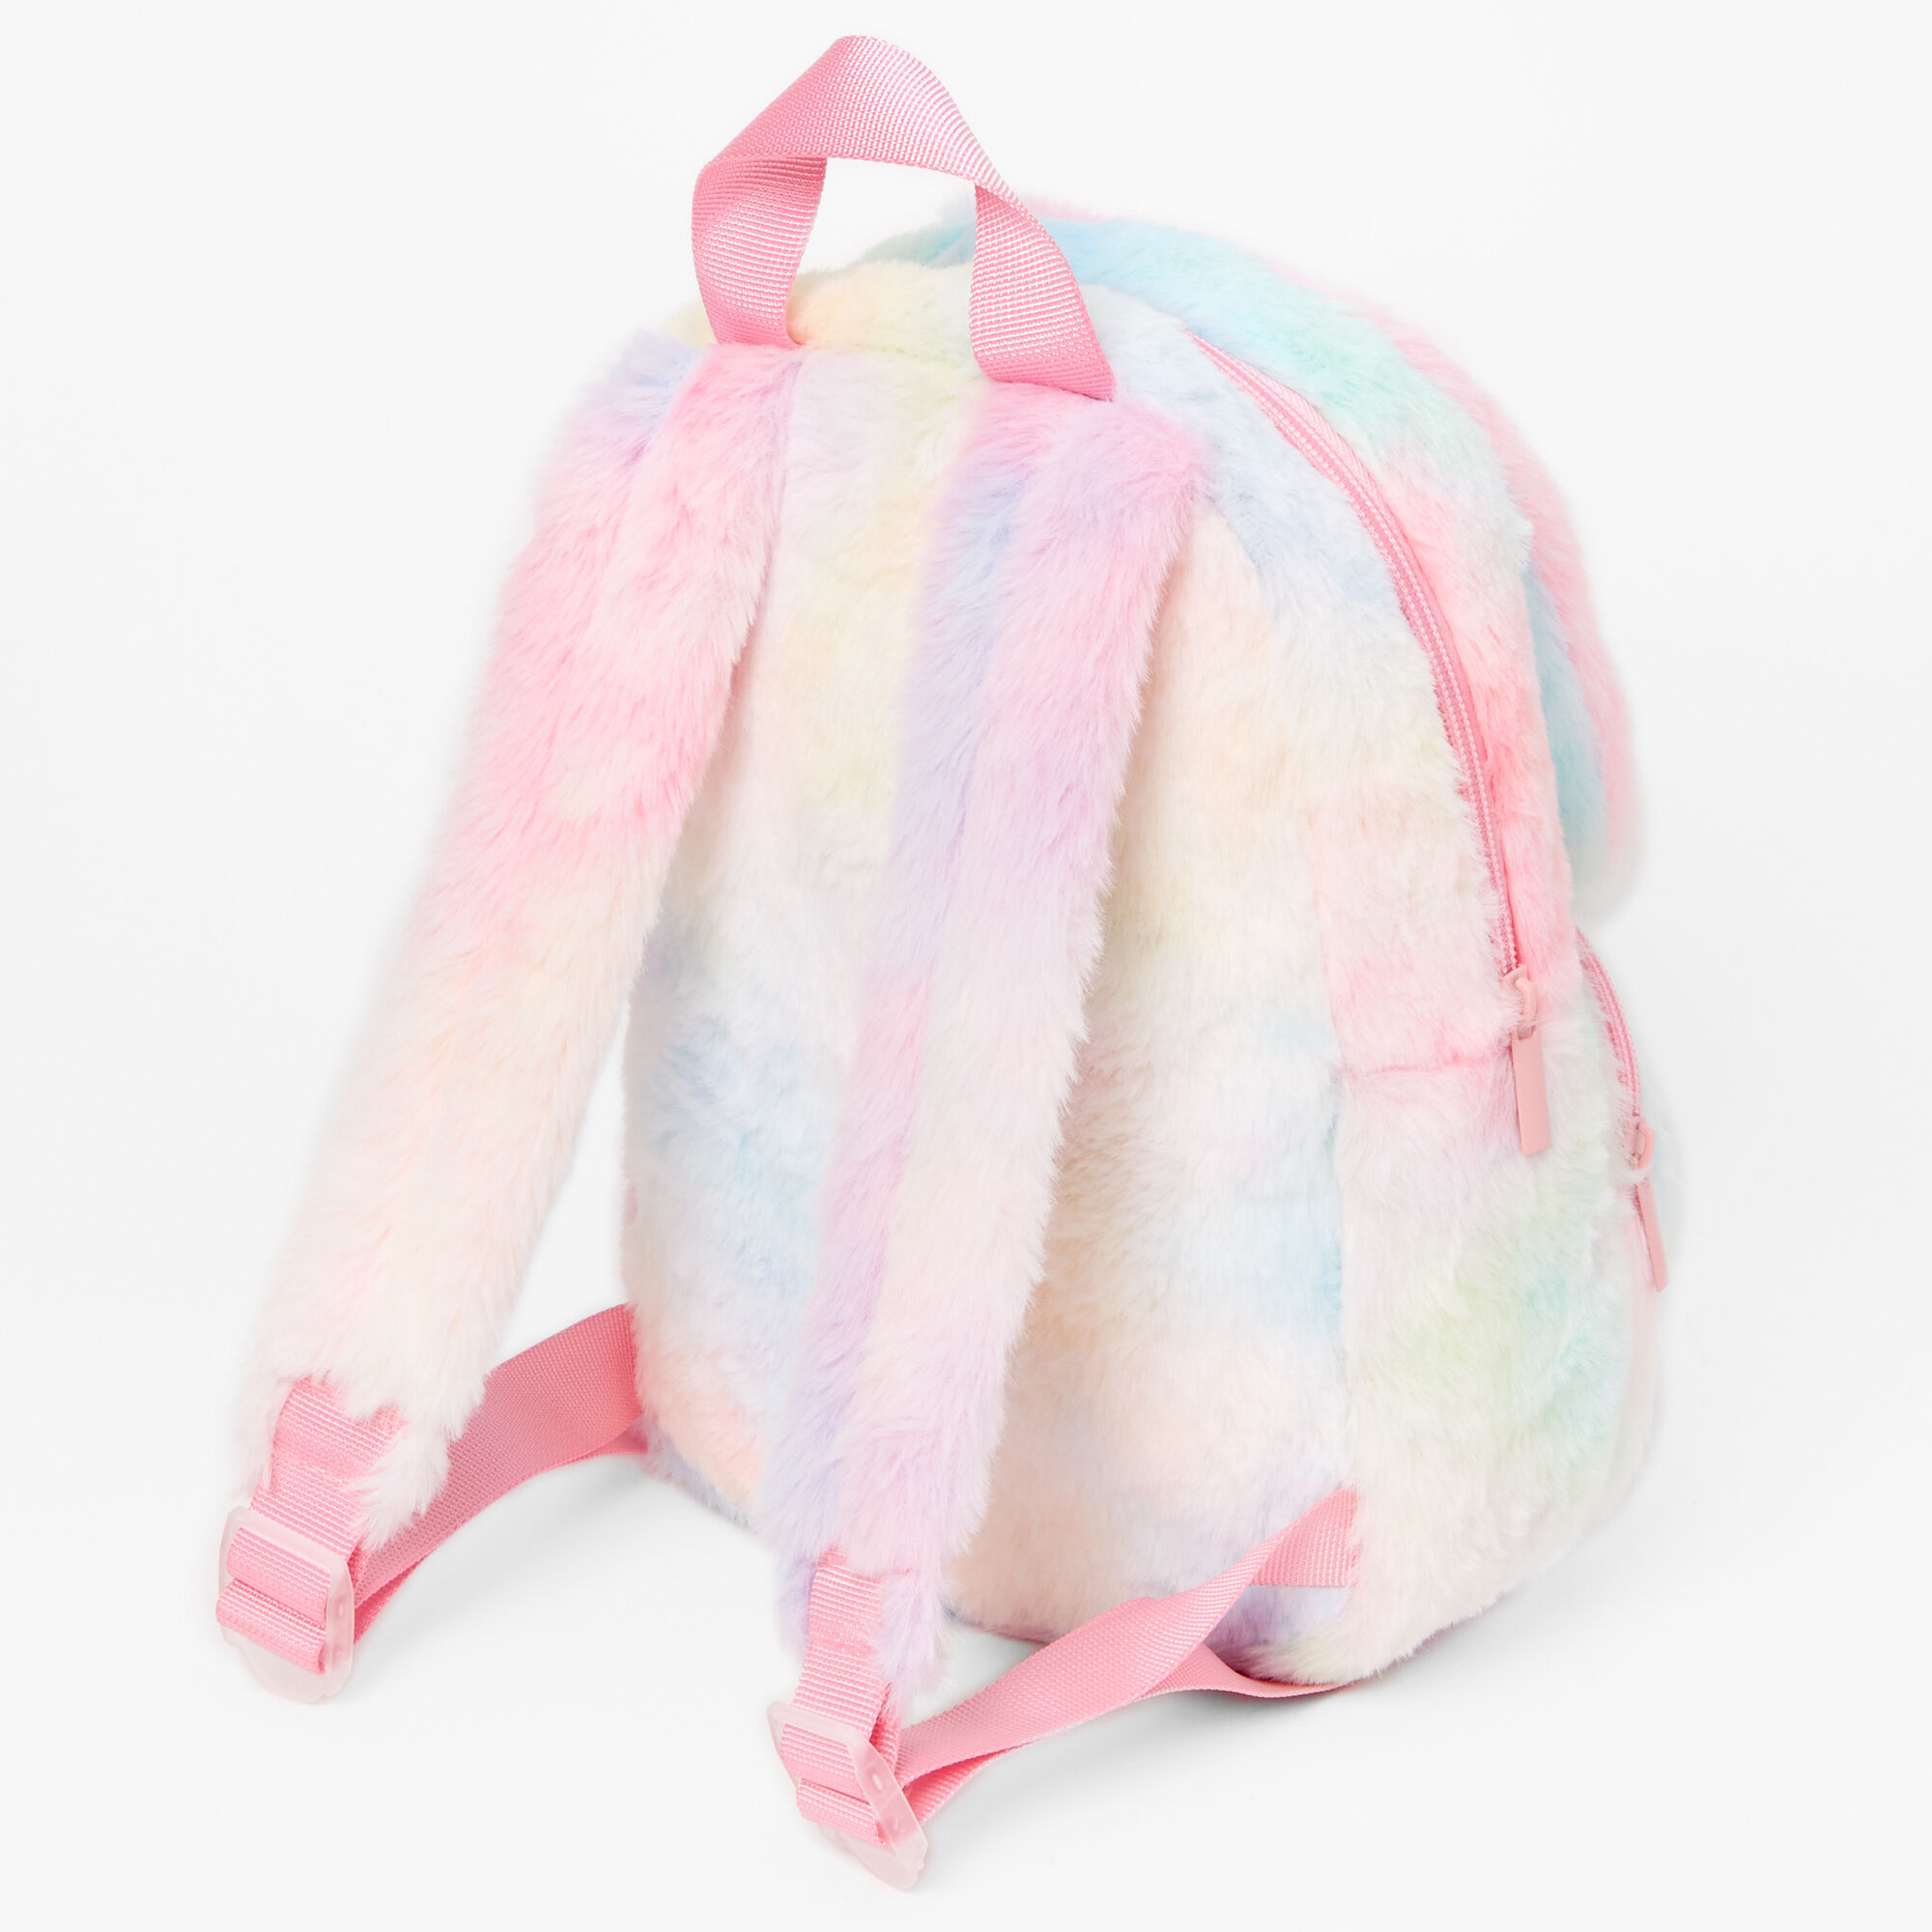 CLAIRE'S PINK TIE DYE MINI BACKPACK BAG GIRLS BNWT XMAS CHRISTMAS GIFT PRESENT 